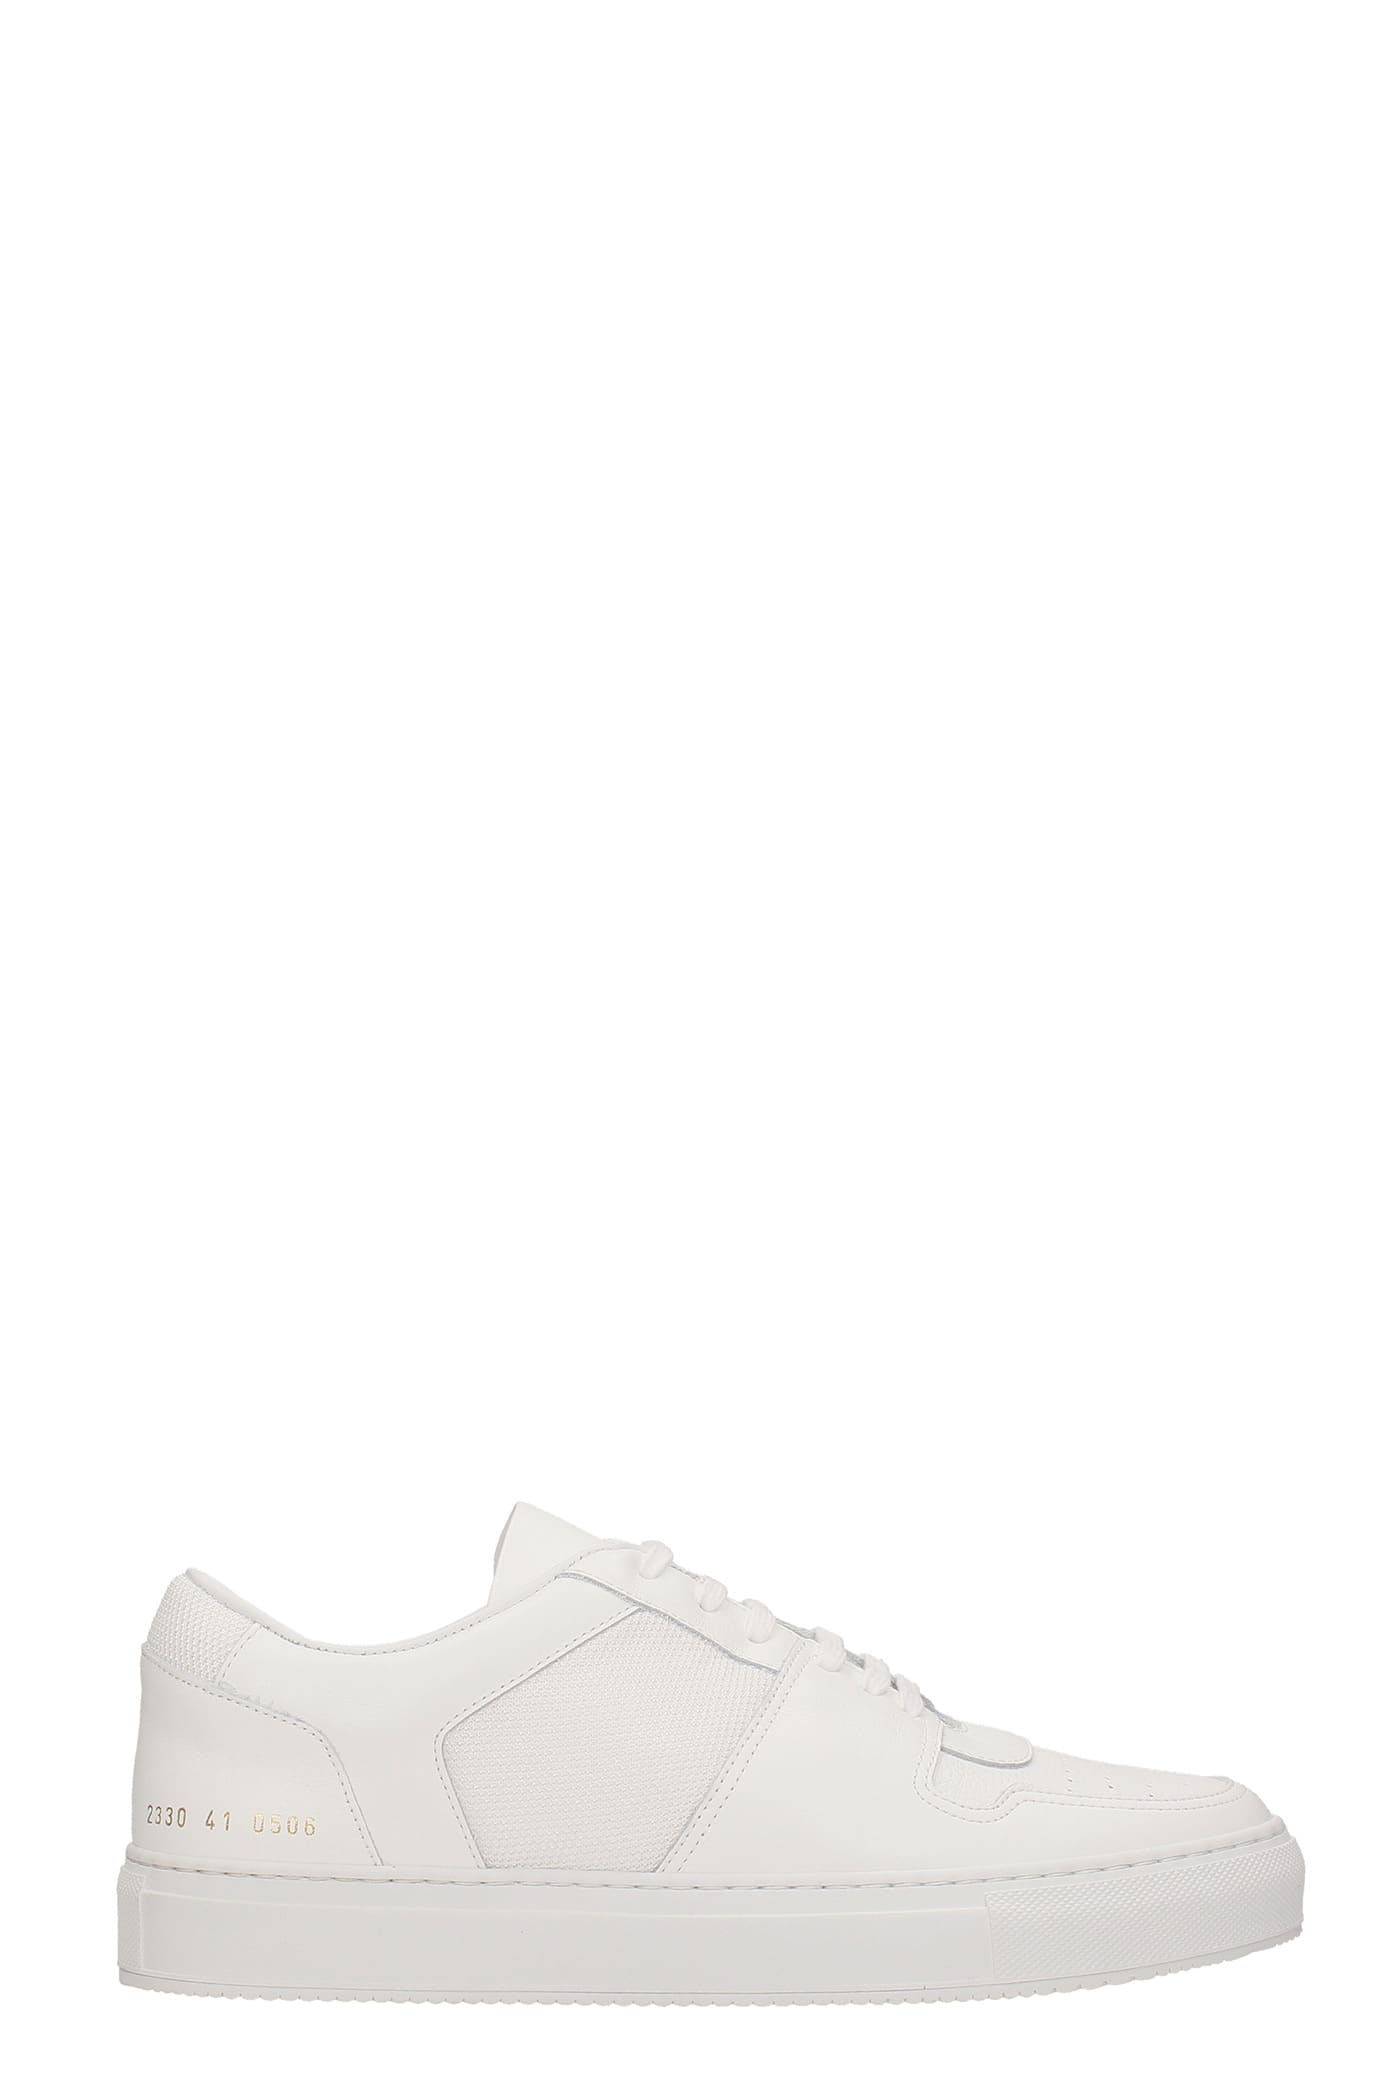 Common Projects Decades Sneakers In White Leather And Fabric